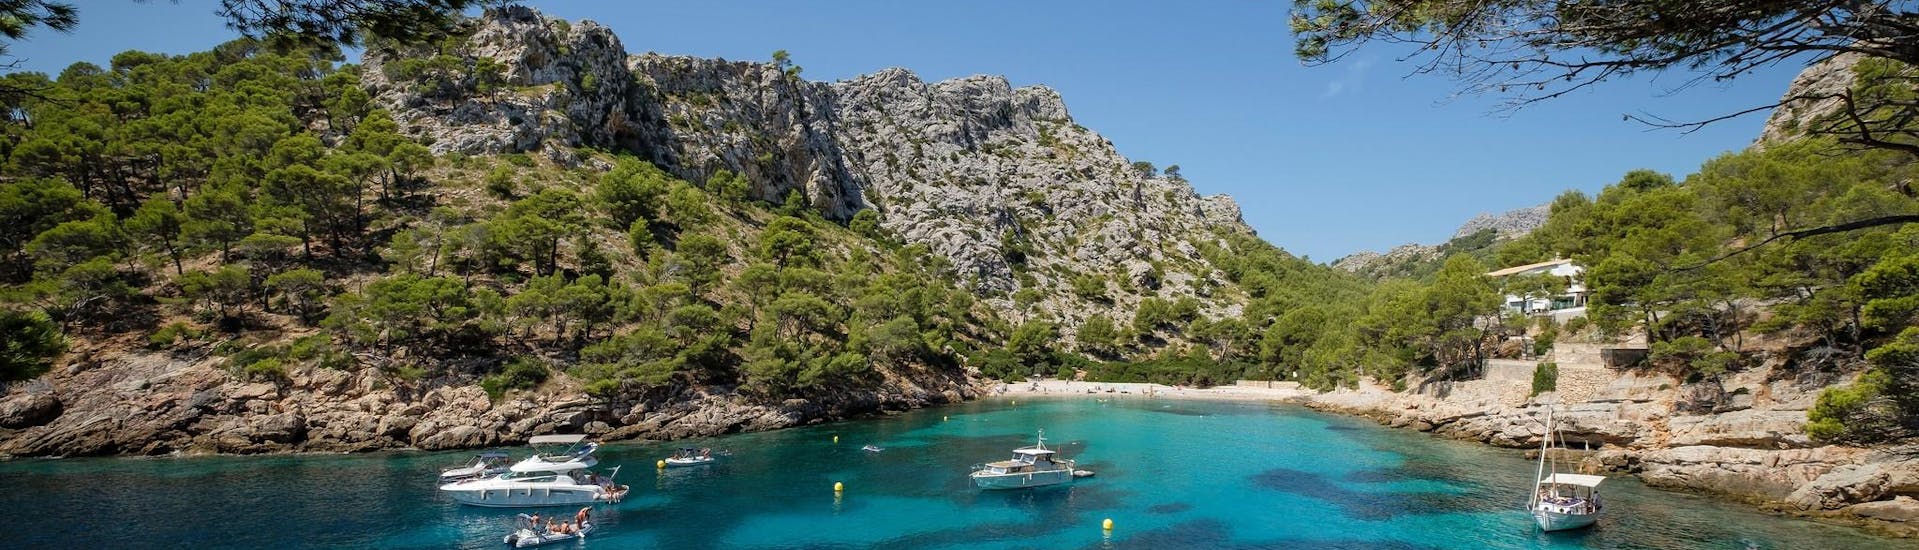 The Cala Murta beach, a wonderful place easy reachable with a boat trip.